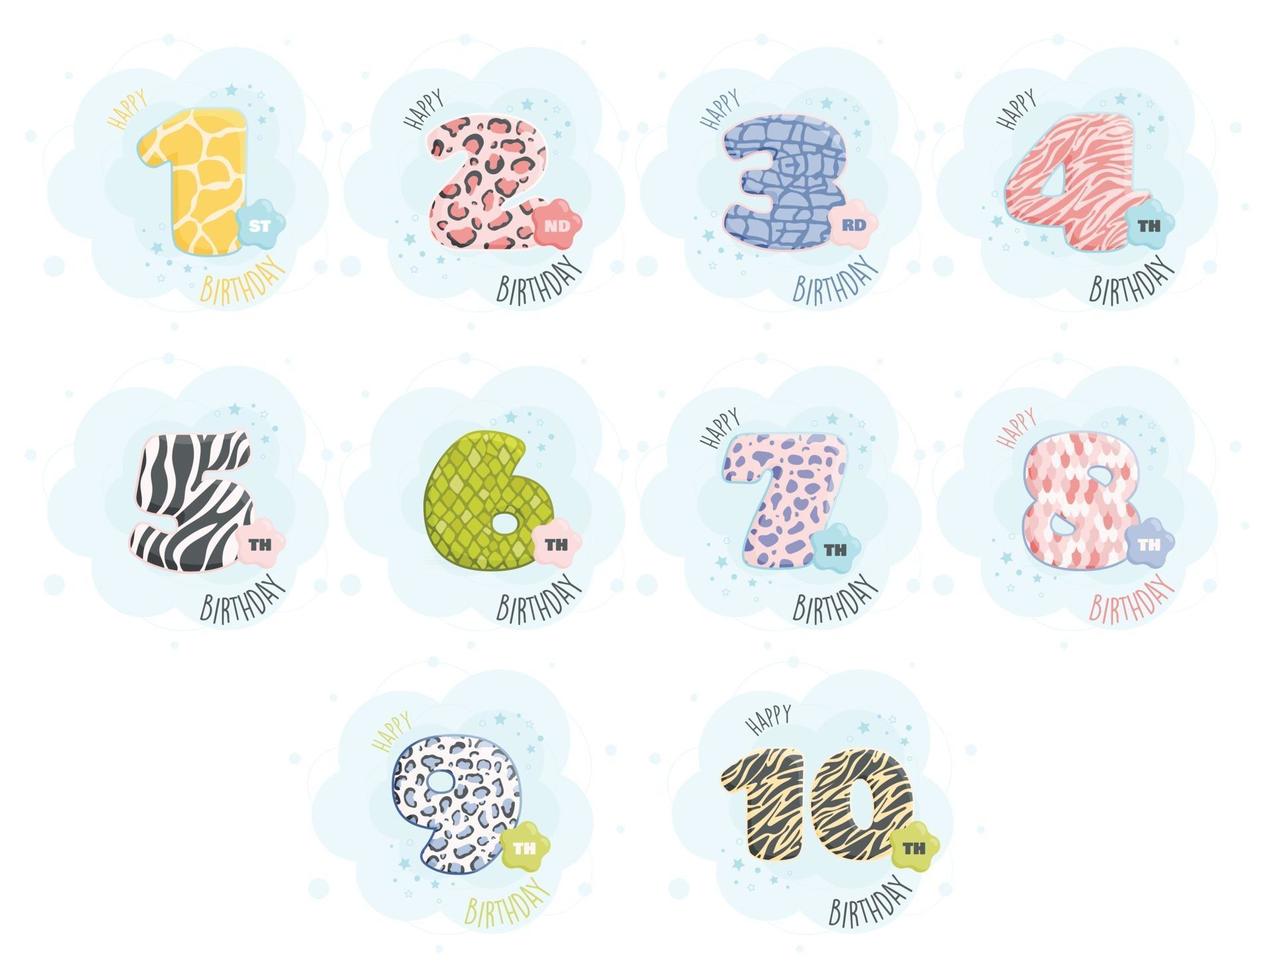 Happy birthday greeting card set with cute animal skin pattern design vector